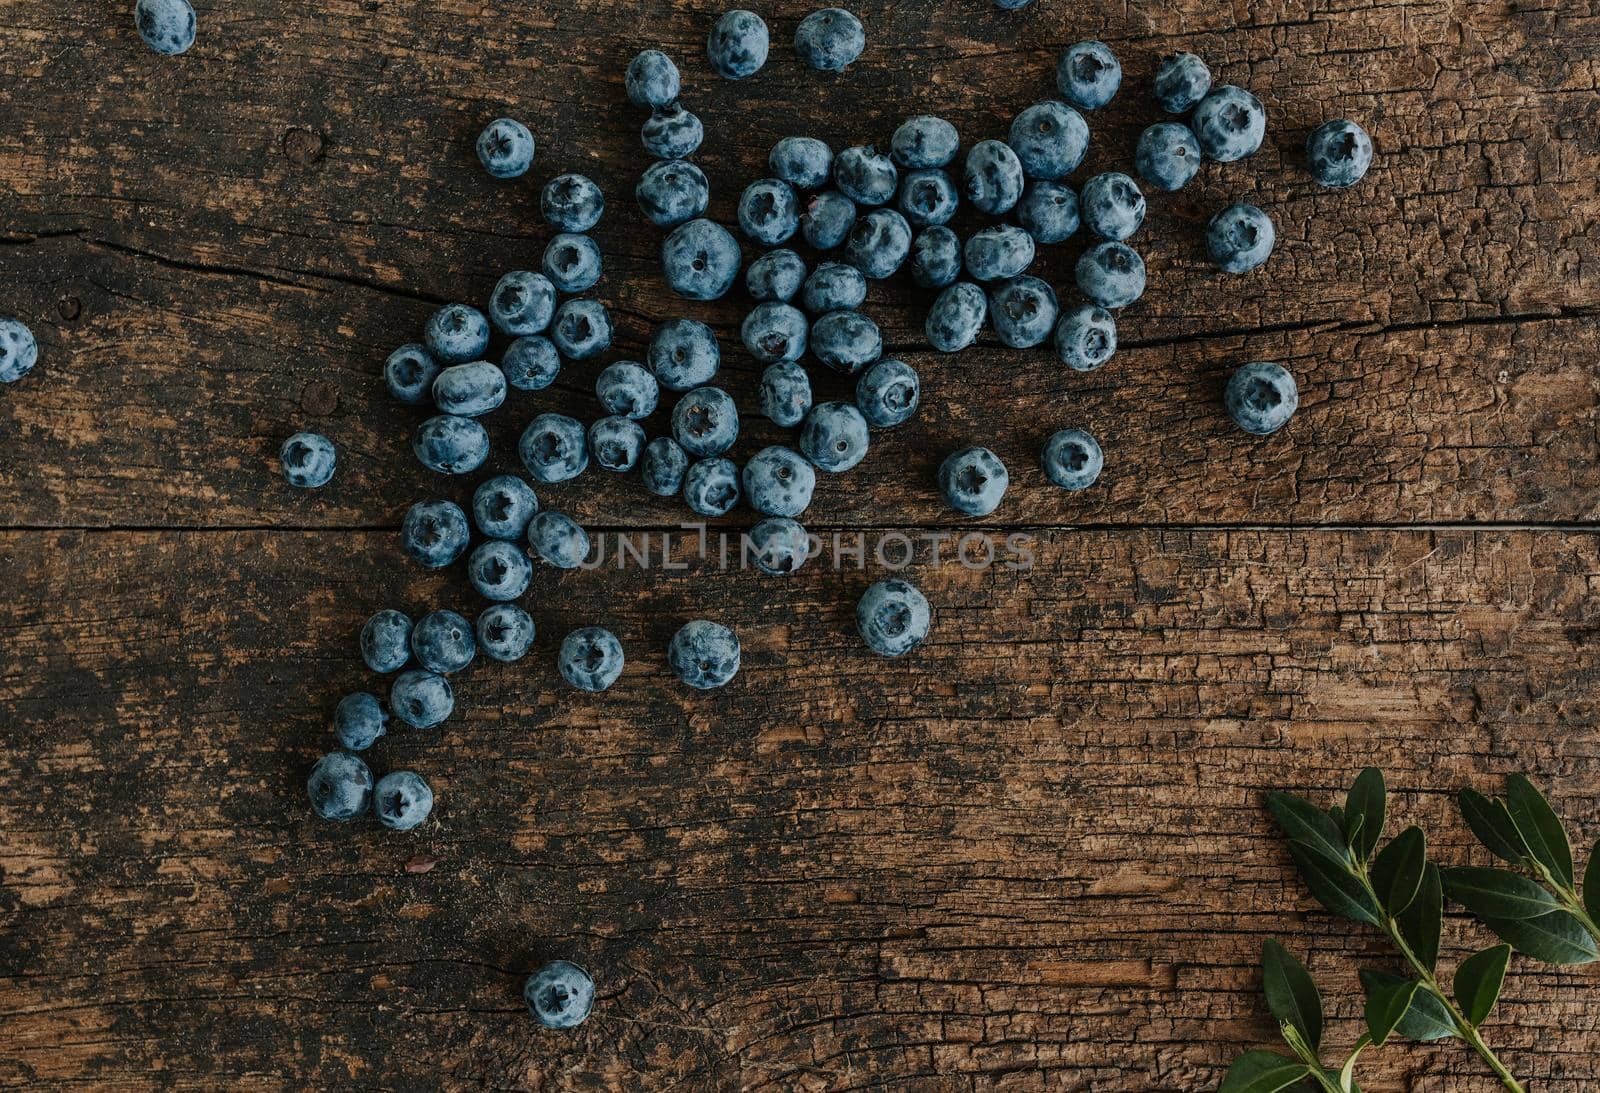 Blue fresh blueberries are scattered on an old brown wooden cracked table.